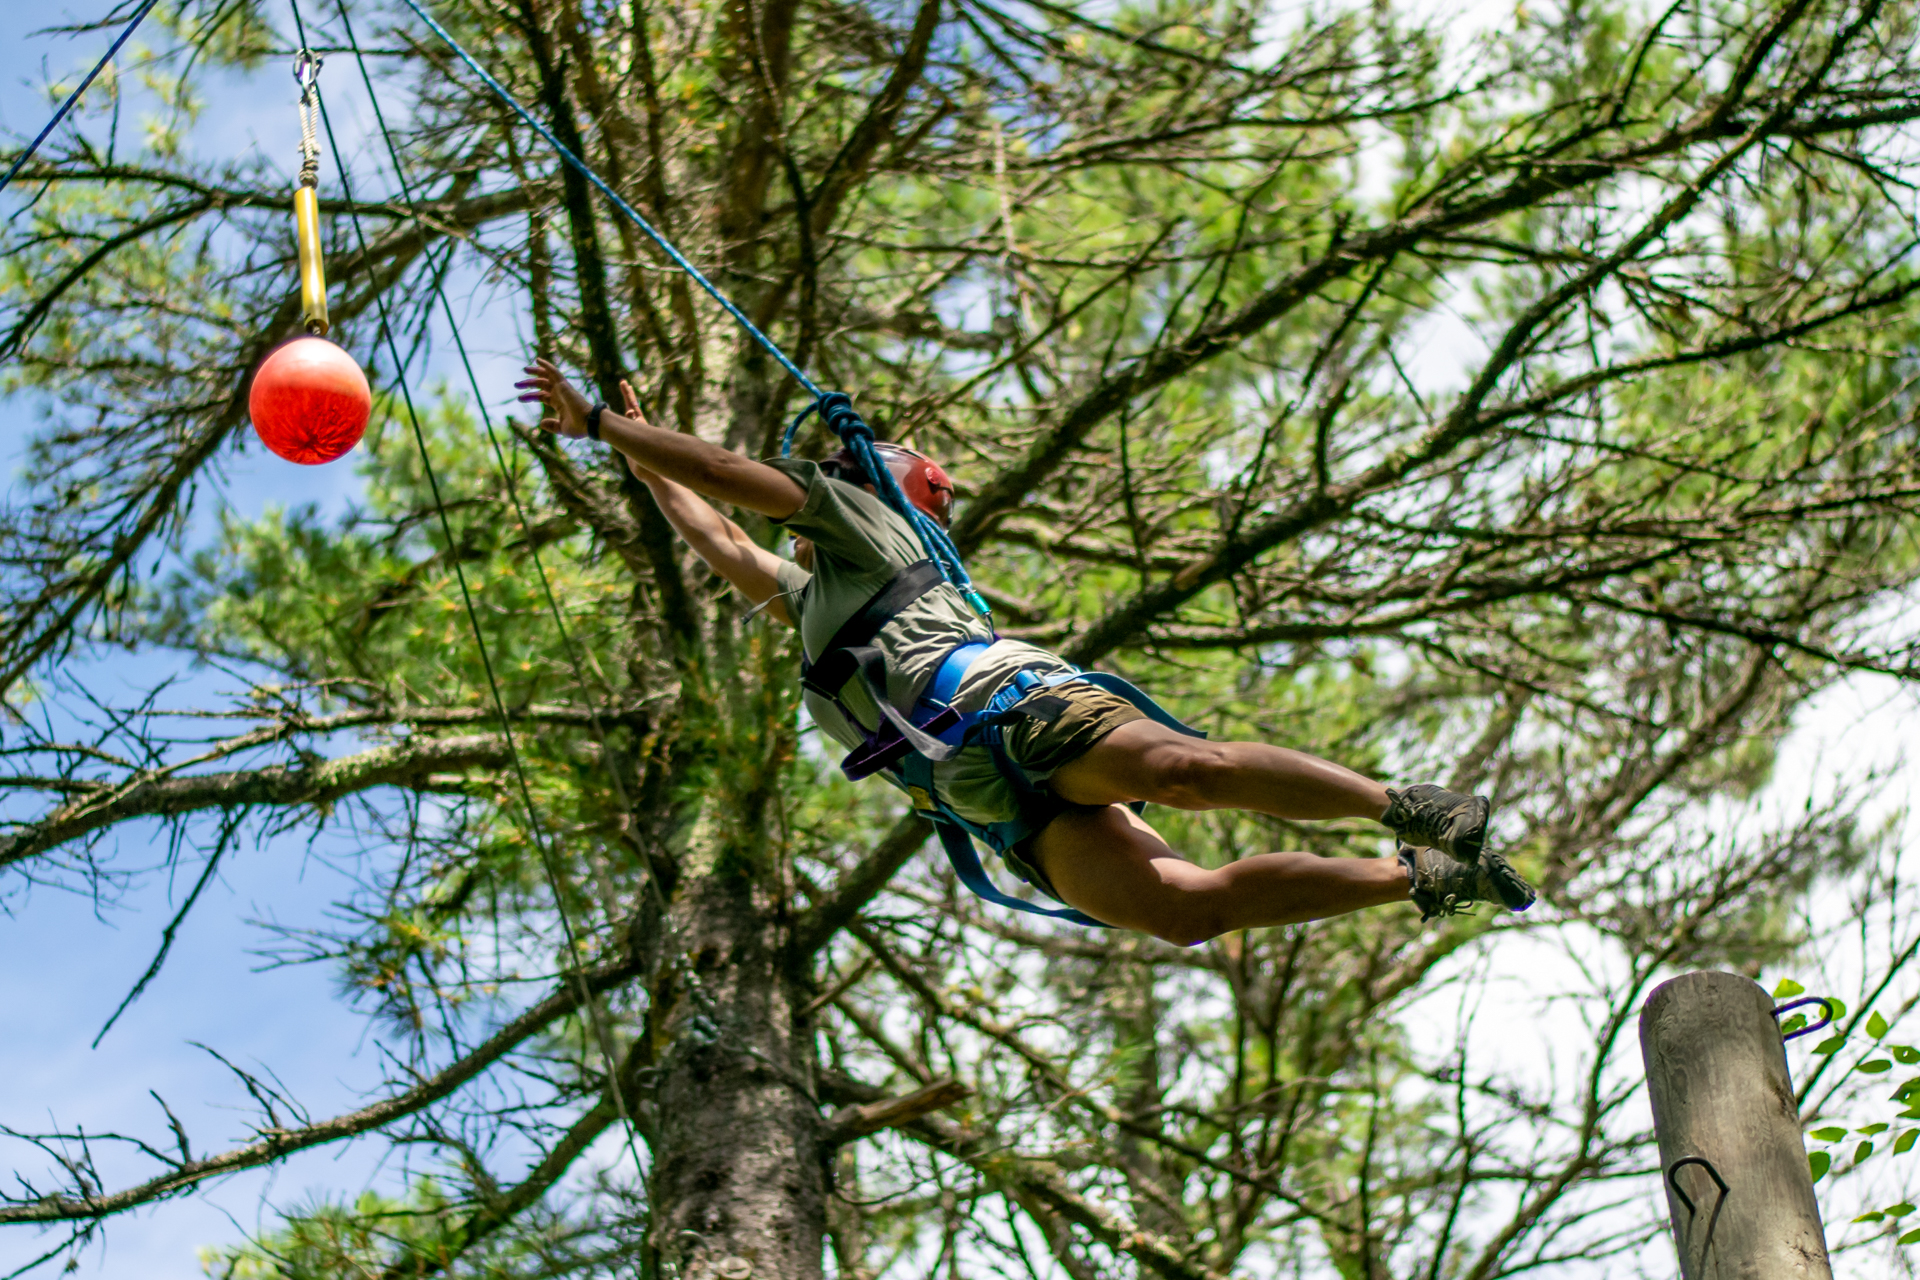 An adult wearing a climbing harness and helmet leaps from the top of a telephone pole, reaching for an orange ball suspended by a cable just out of reach, with pine trees and blue sky in the background